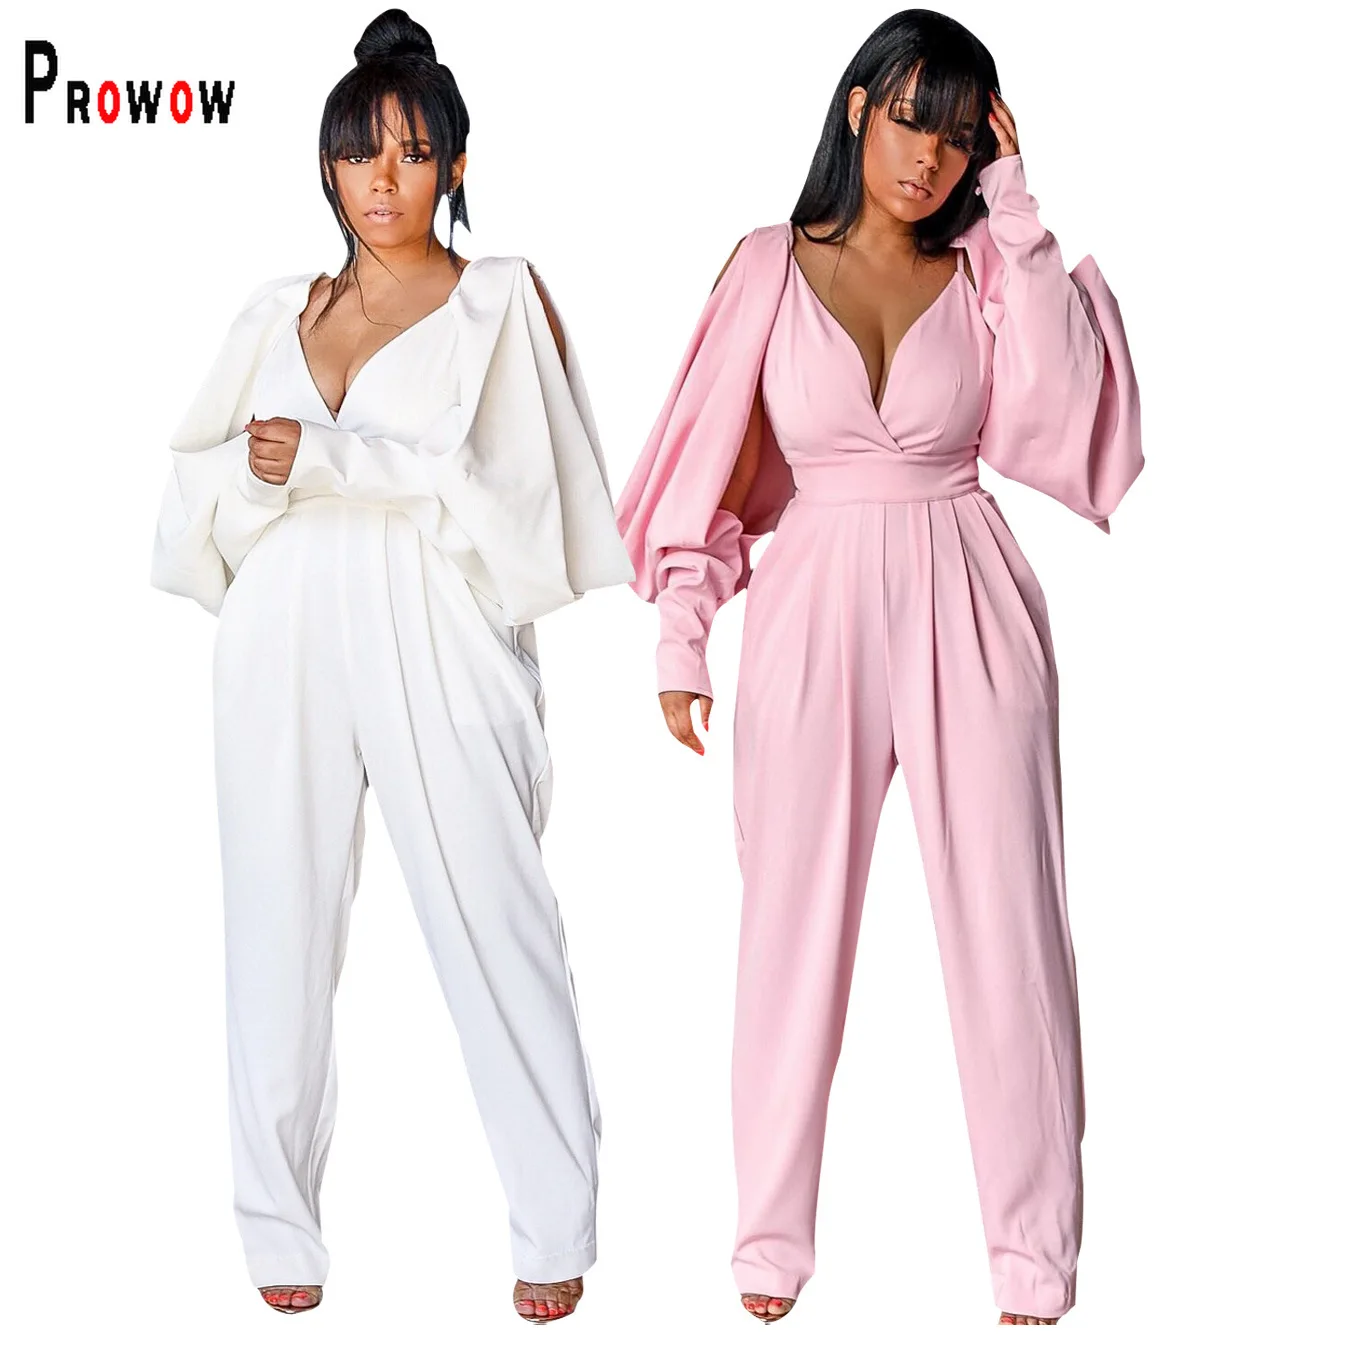 

Prowow Women Jumpsuits Fashion Office Lady Elegant Romper for Woman Long Sleeve High Waisted V-neck Romper One-piece Playsuits